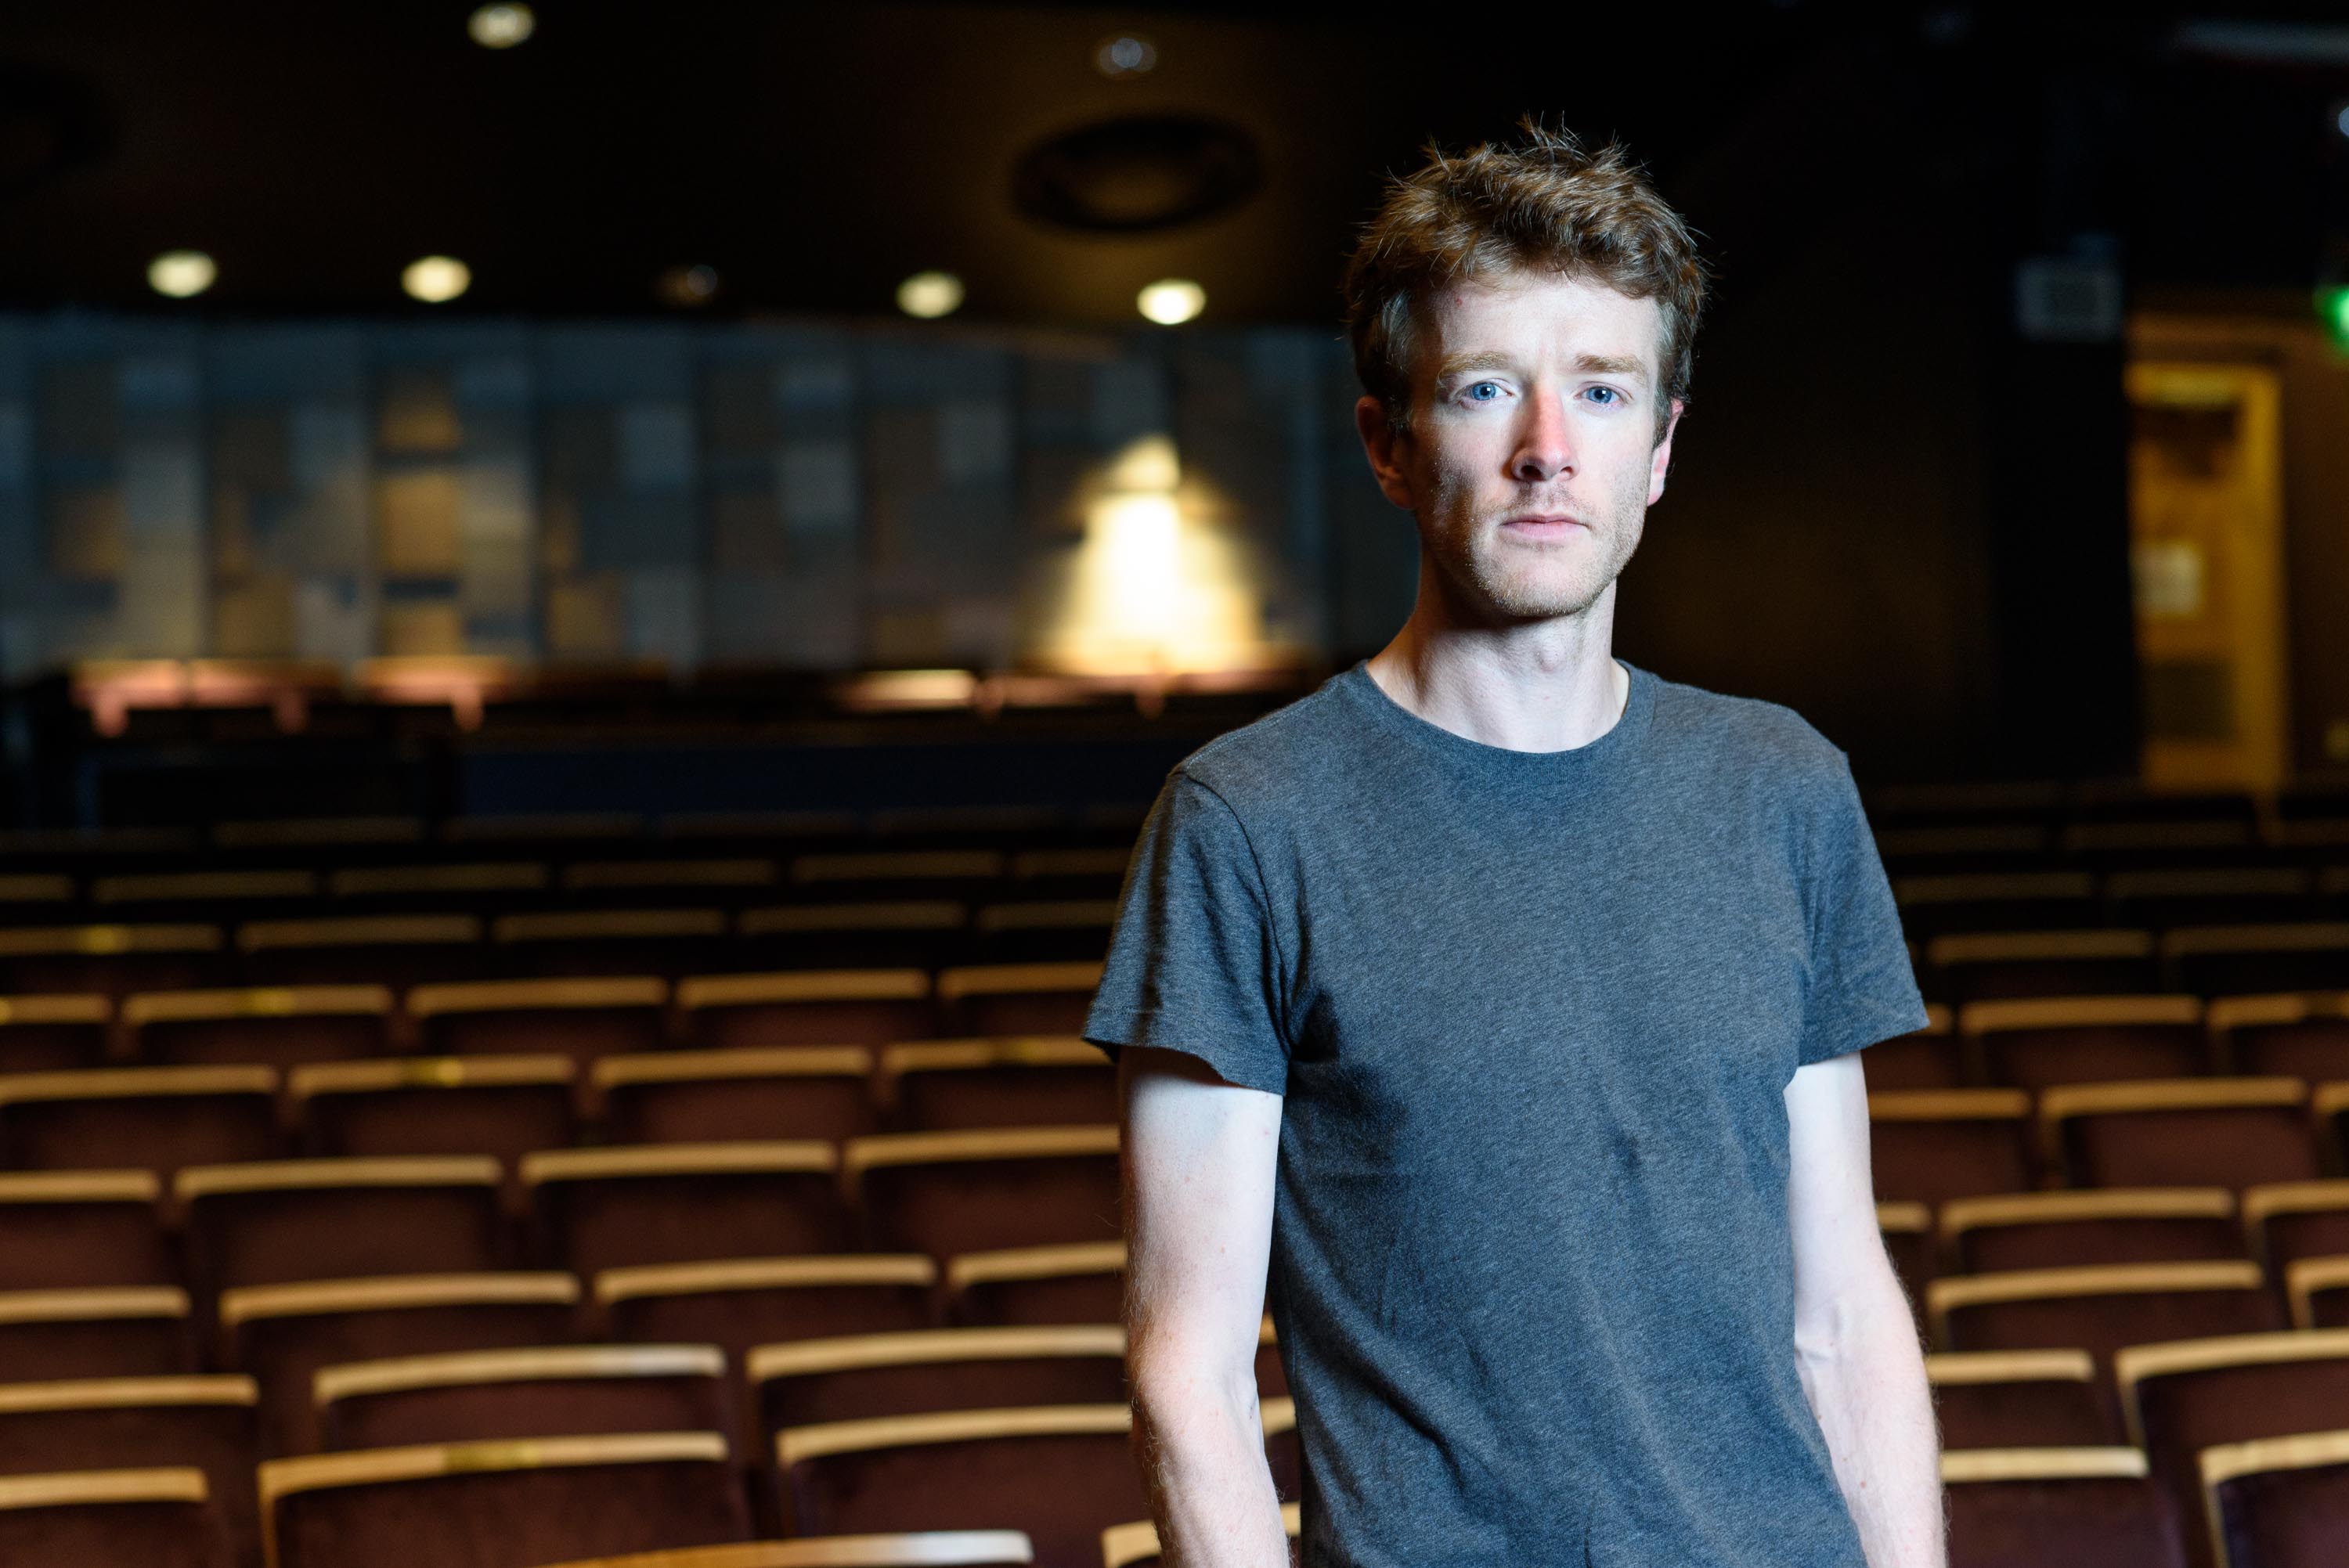 Cork Opera House and UCC announce the appointment of the inaugural Theatre Artist in Residence